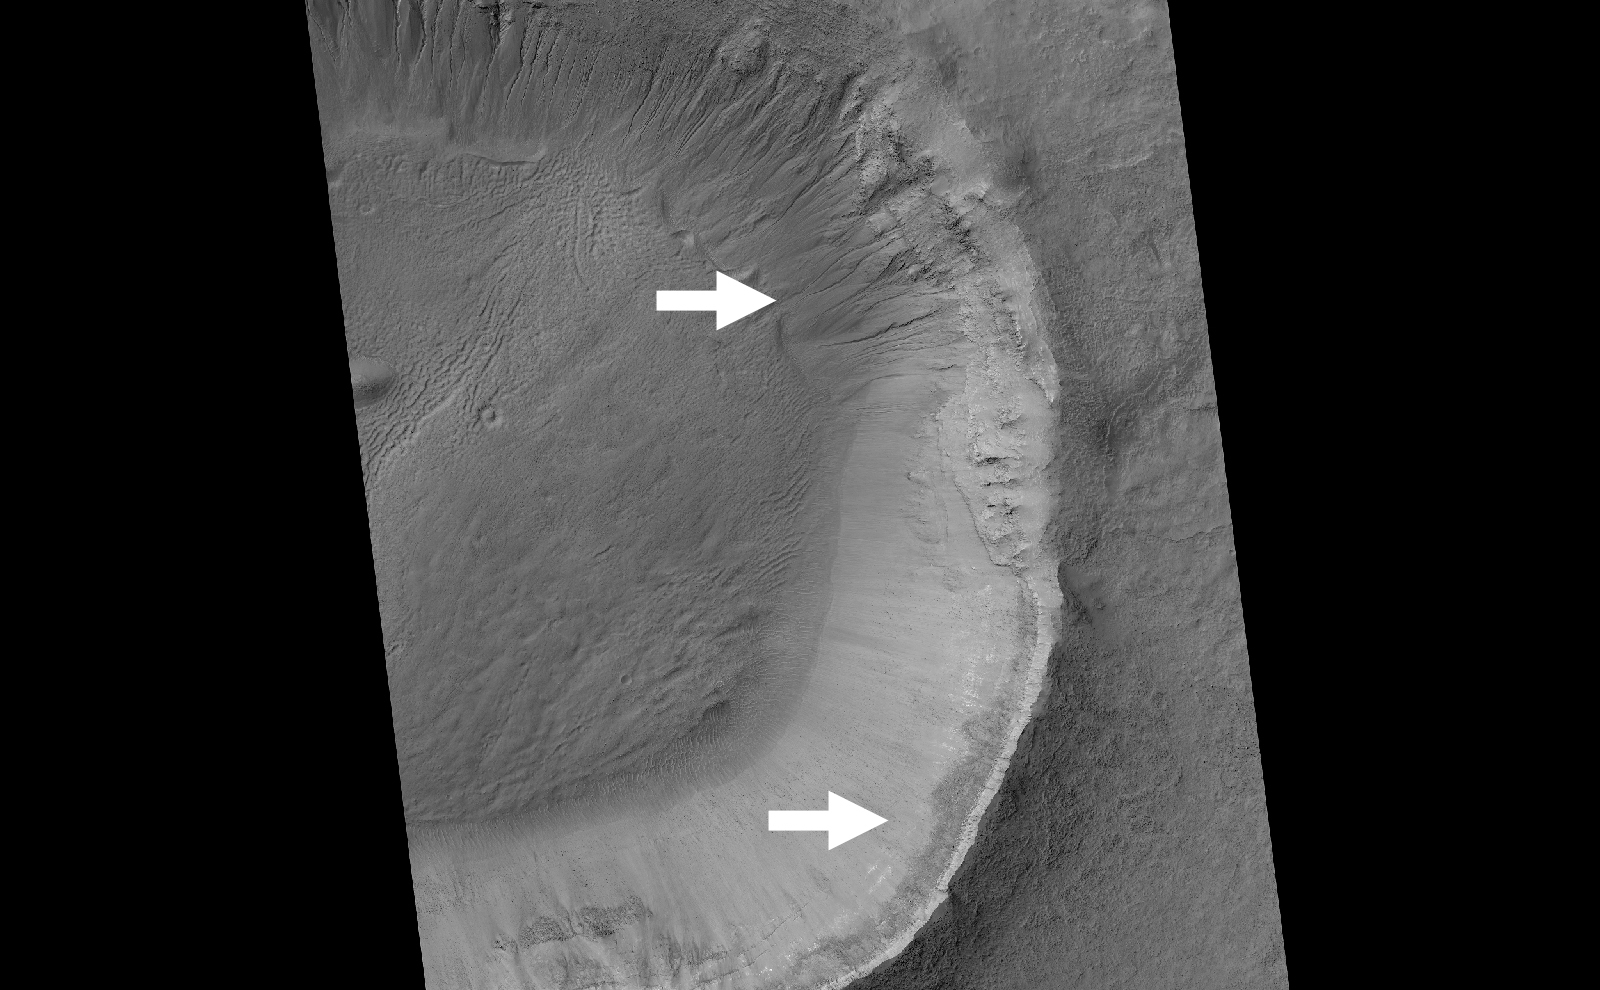 This image contrasts gullies and recurring warm-season slope flows appearing in the same crater, in the middle southern latitudes of Mars.